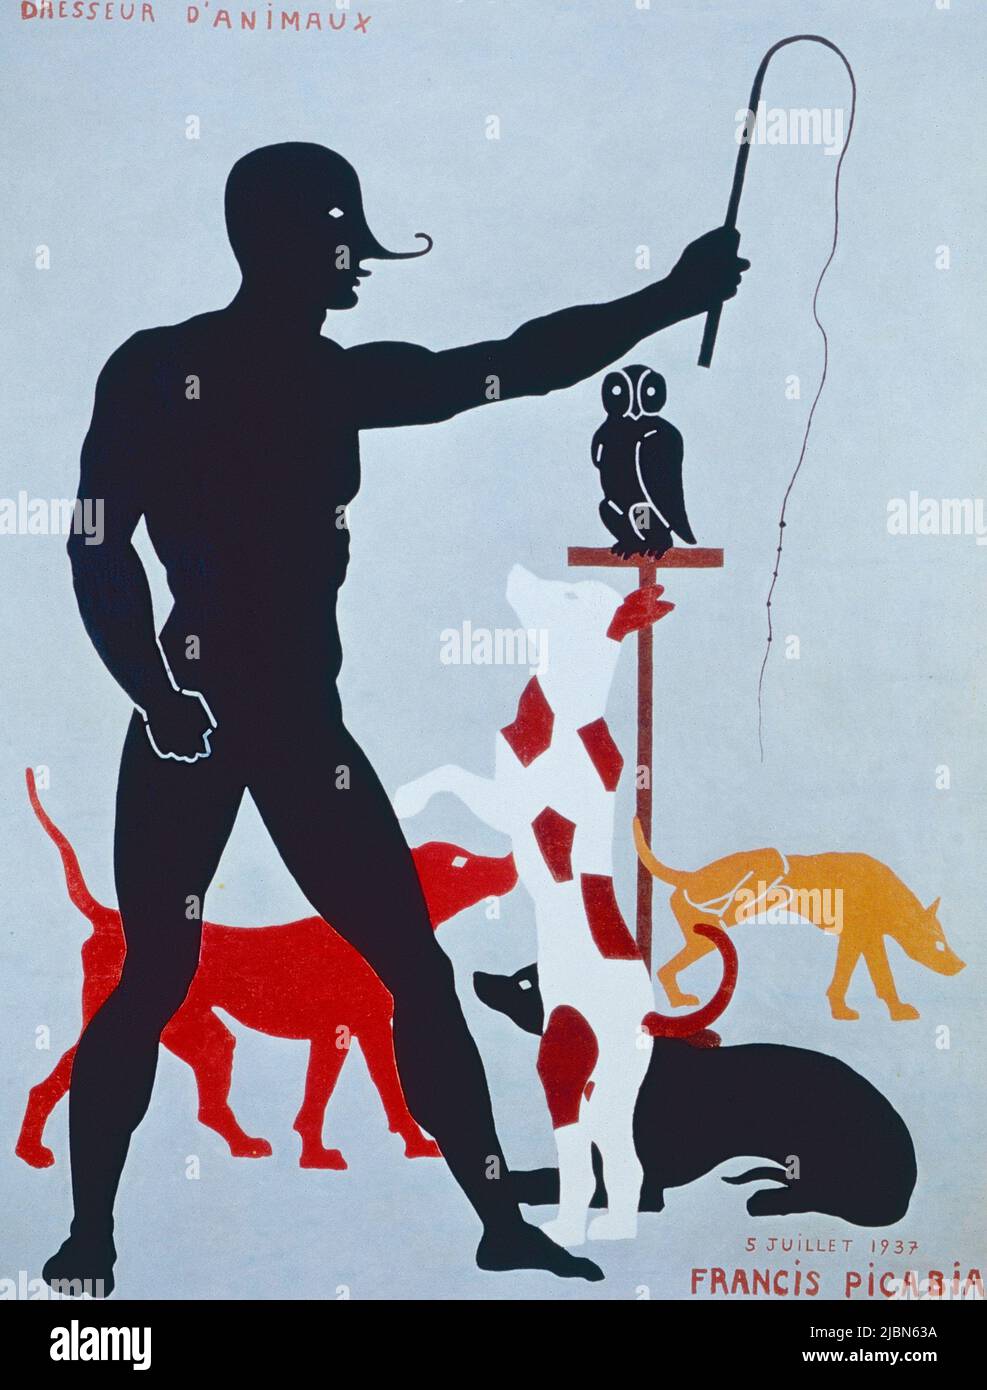 Dresseur d'animaux, Artwork by French artist Francis Picabia, 1937 Stock Photo